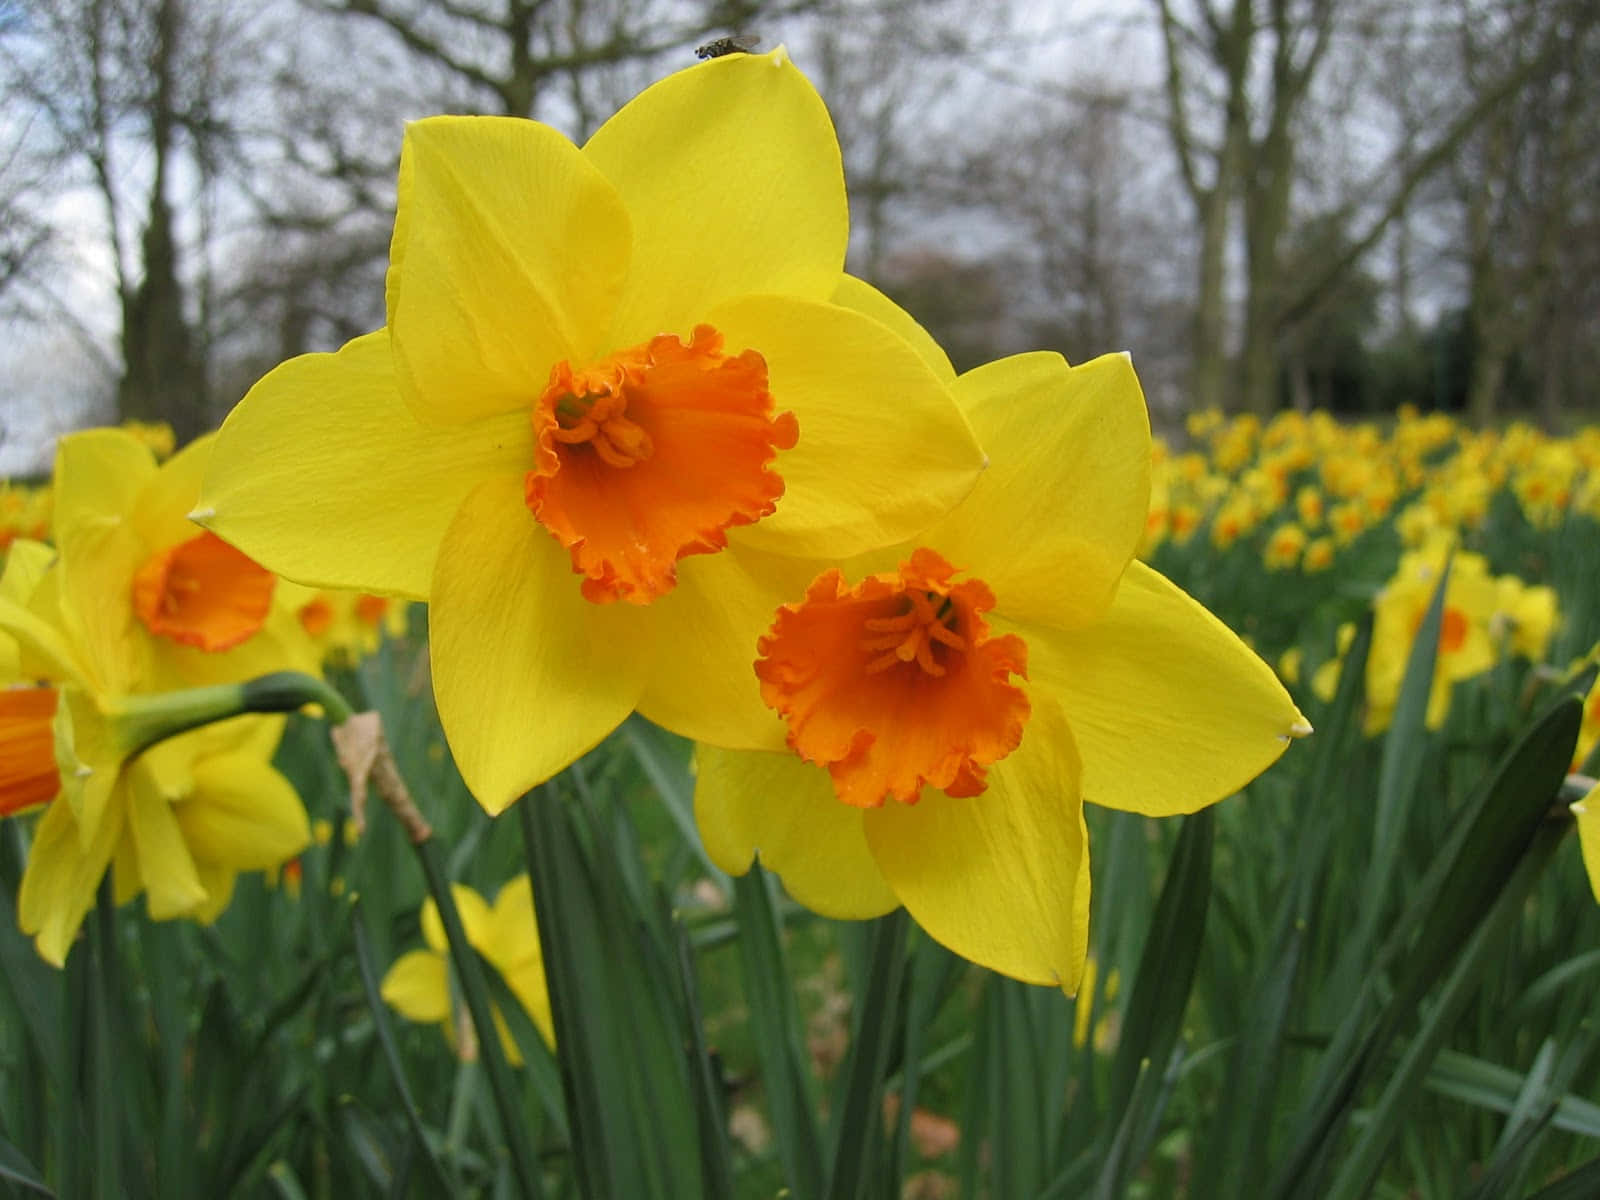 A beautiful, yellow daffodil flower with tinge of orange on the edge of its petals